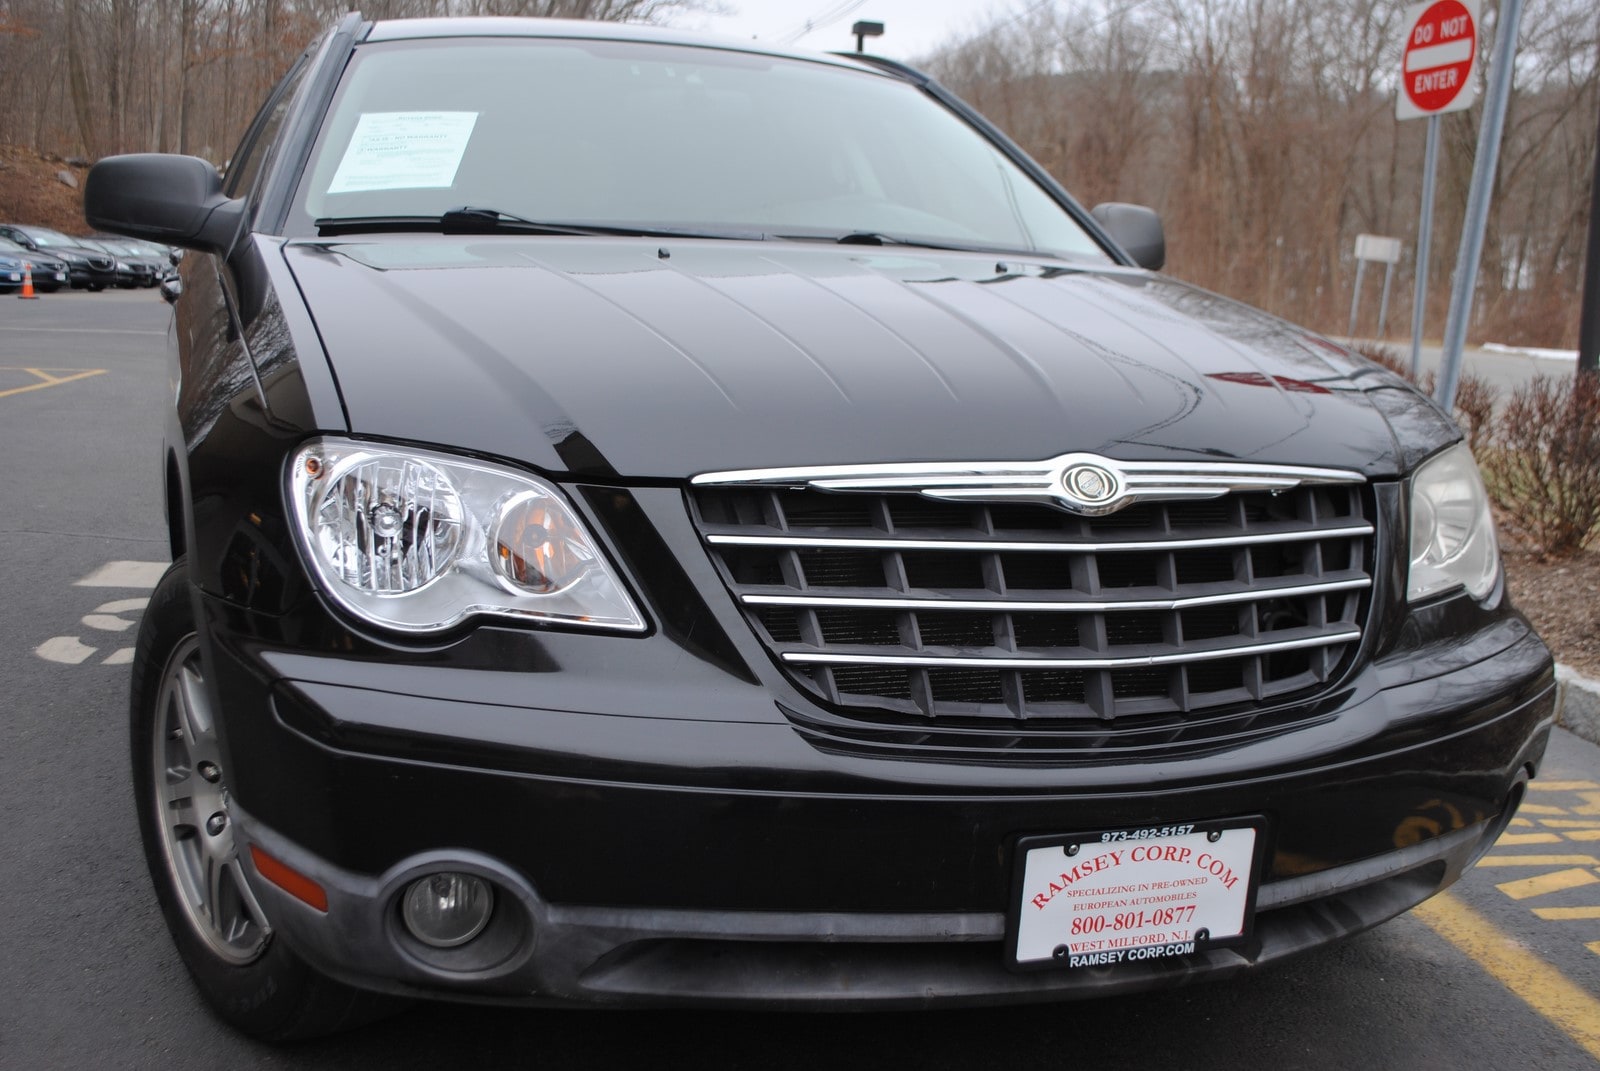 Used 2008 Chrysler Pacifica For Sale at Ramsey Corp. | VIN